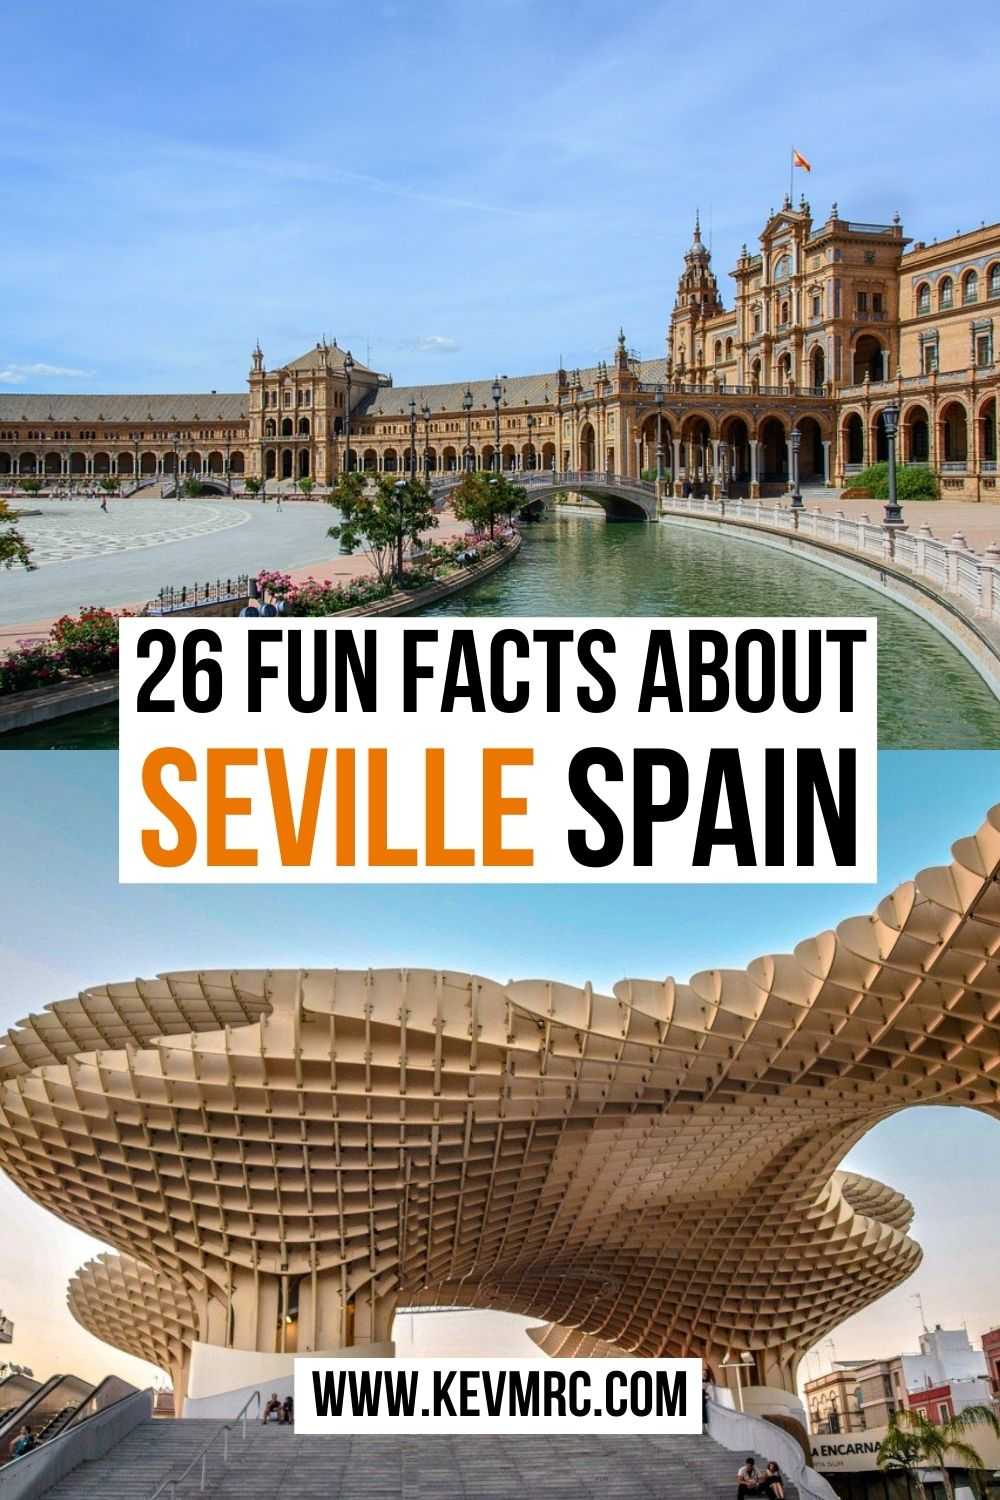 Located in southern Spain, Seville is the capital of Andalusia and the sunniest city in Europe. Learn more with these 26 interesting facts about Seville Spain! seville spain facts | seville facts | spain facts fun | fun facts about spain #spainfacts #seville